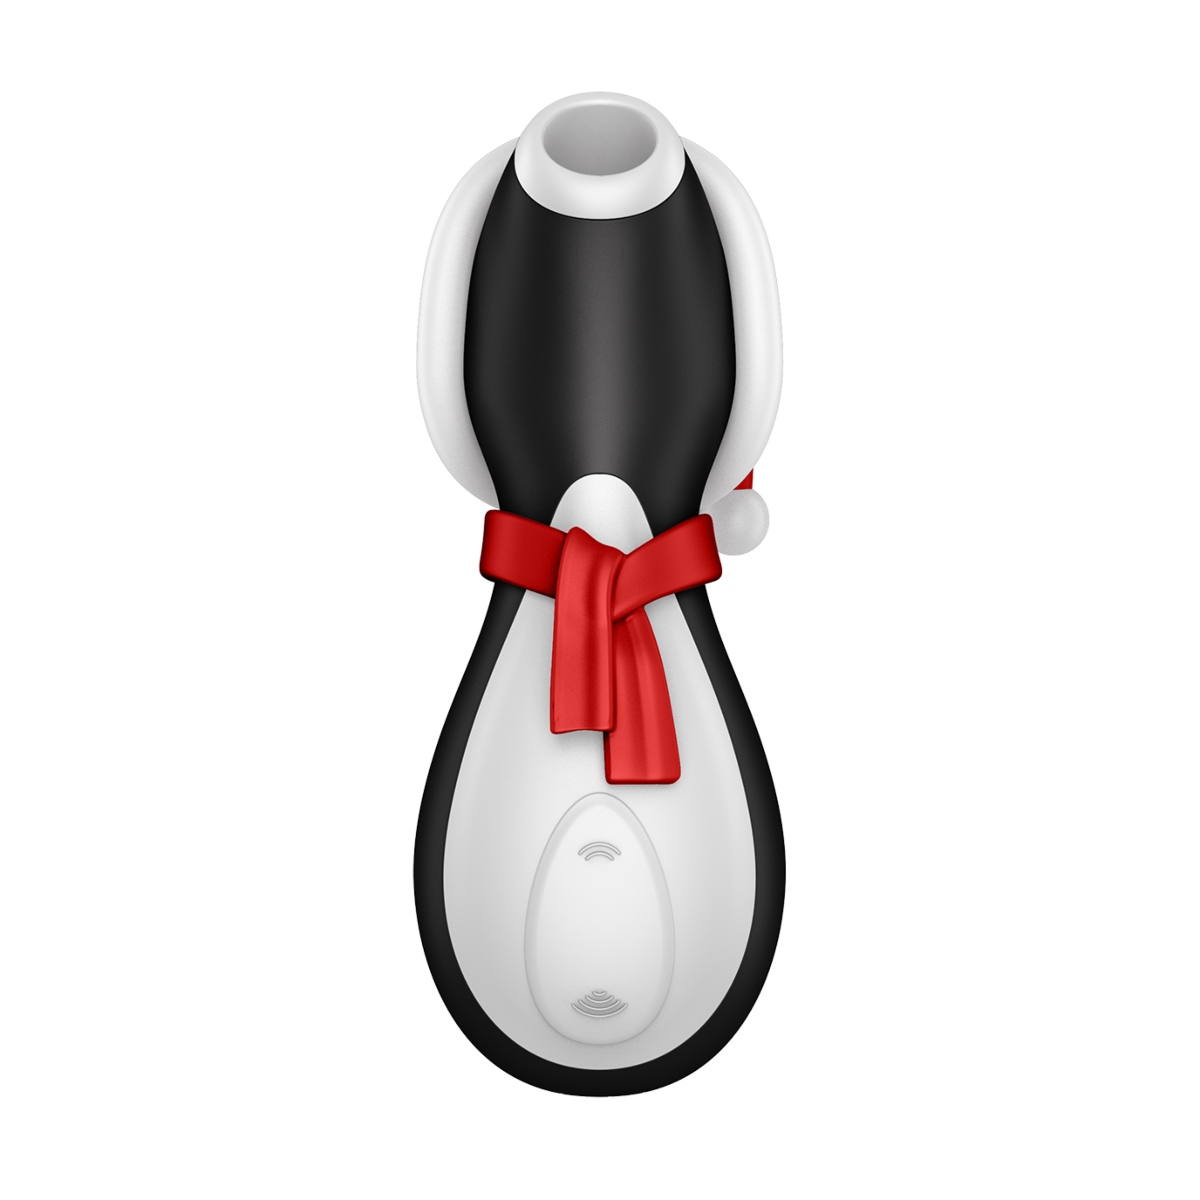 Satisfyer Penguin Holiday Edition Clitoral Vibrator